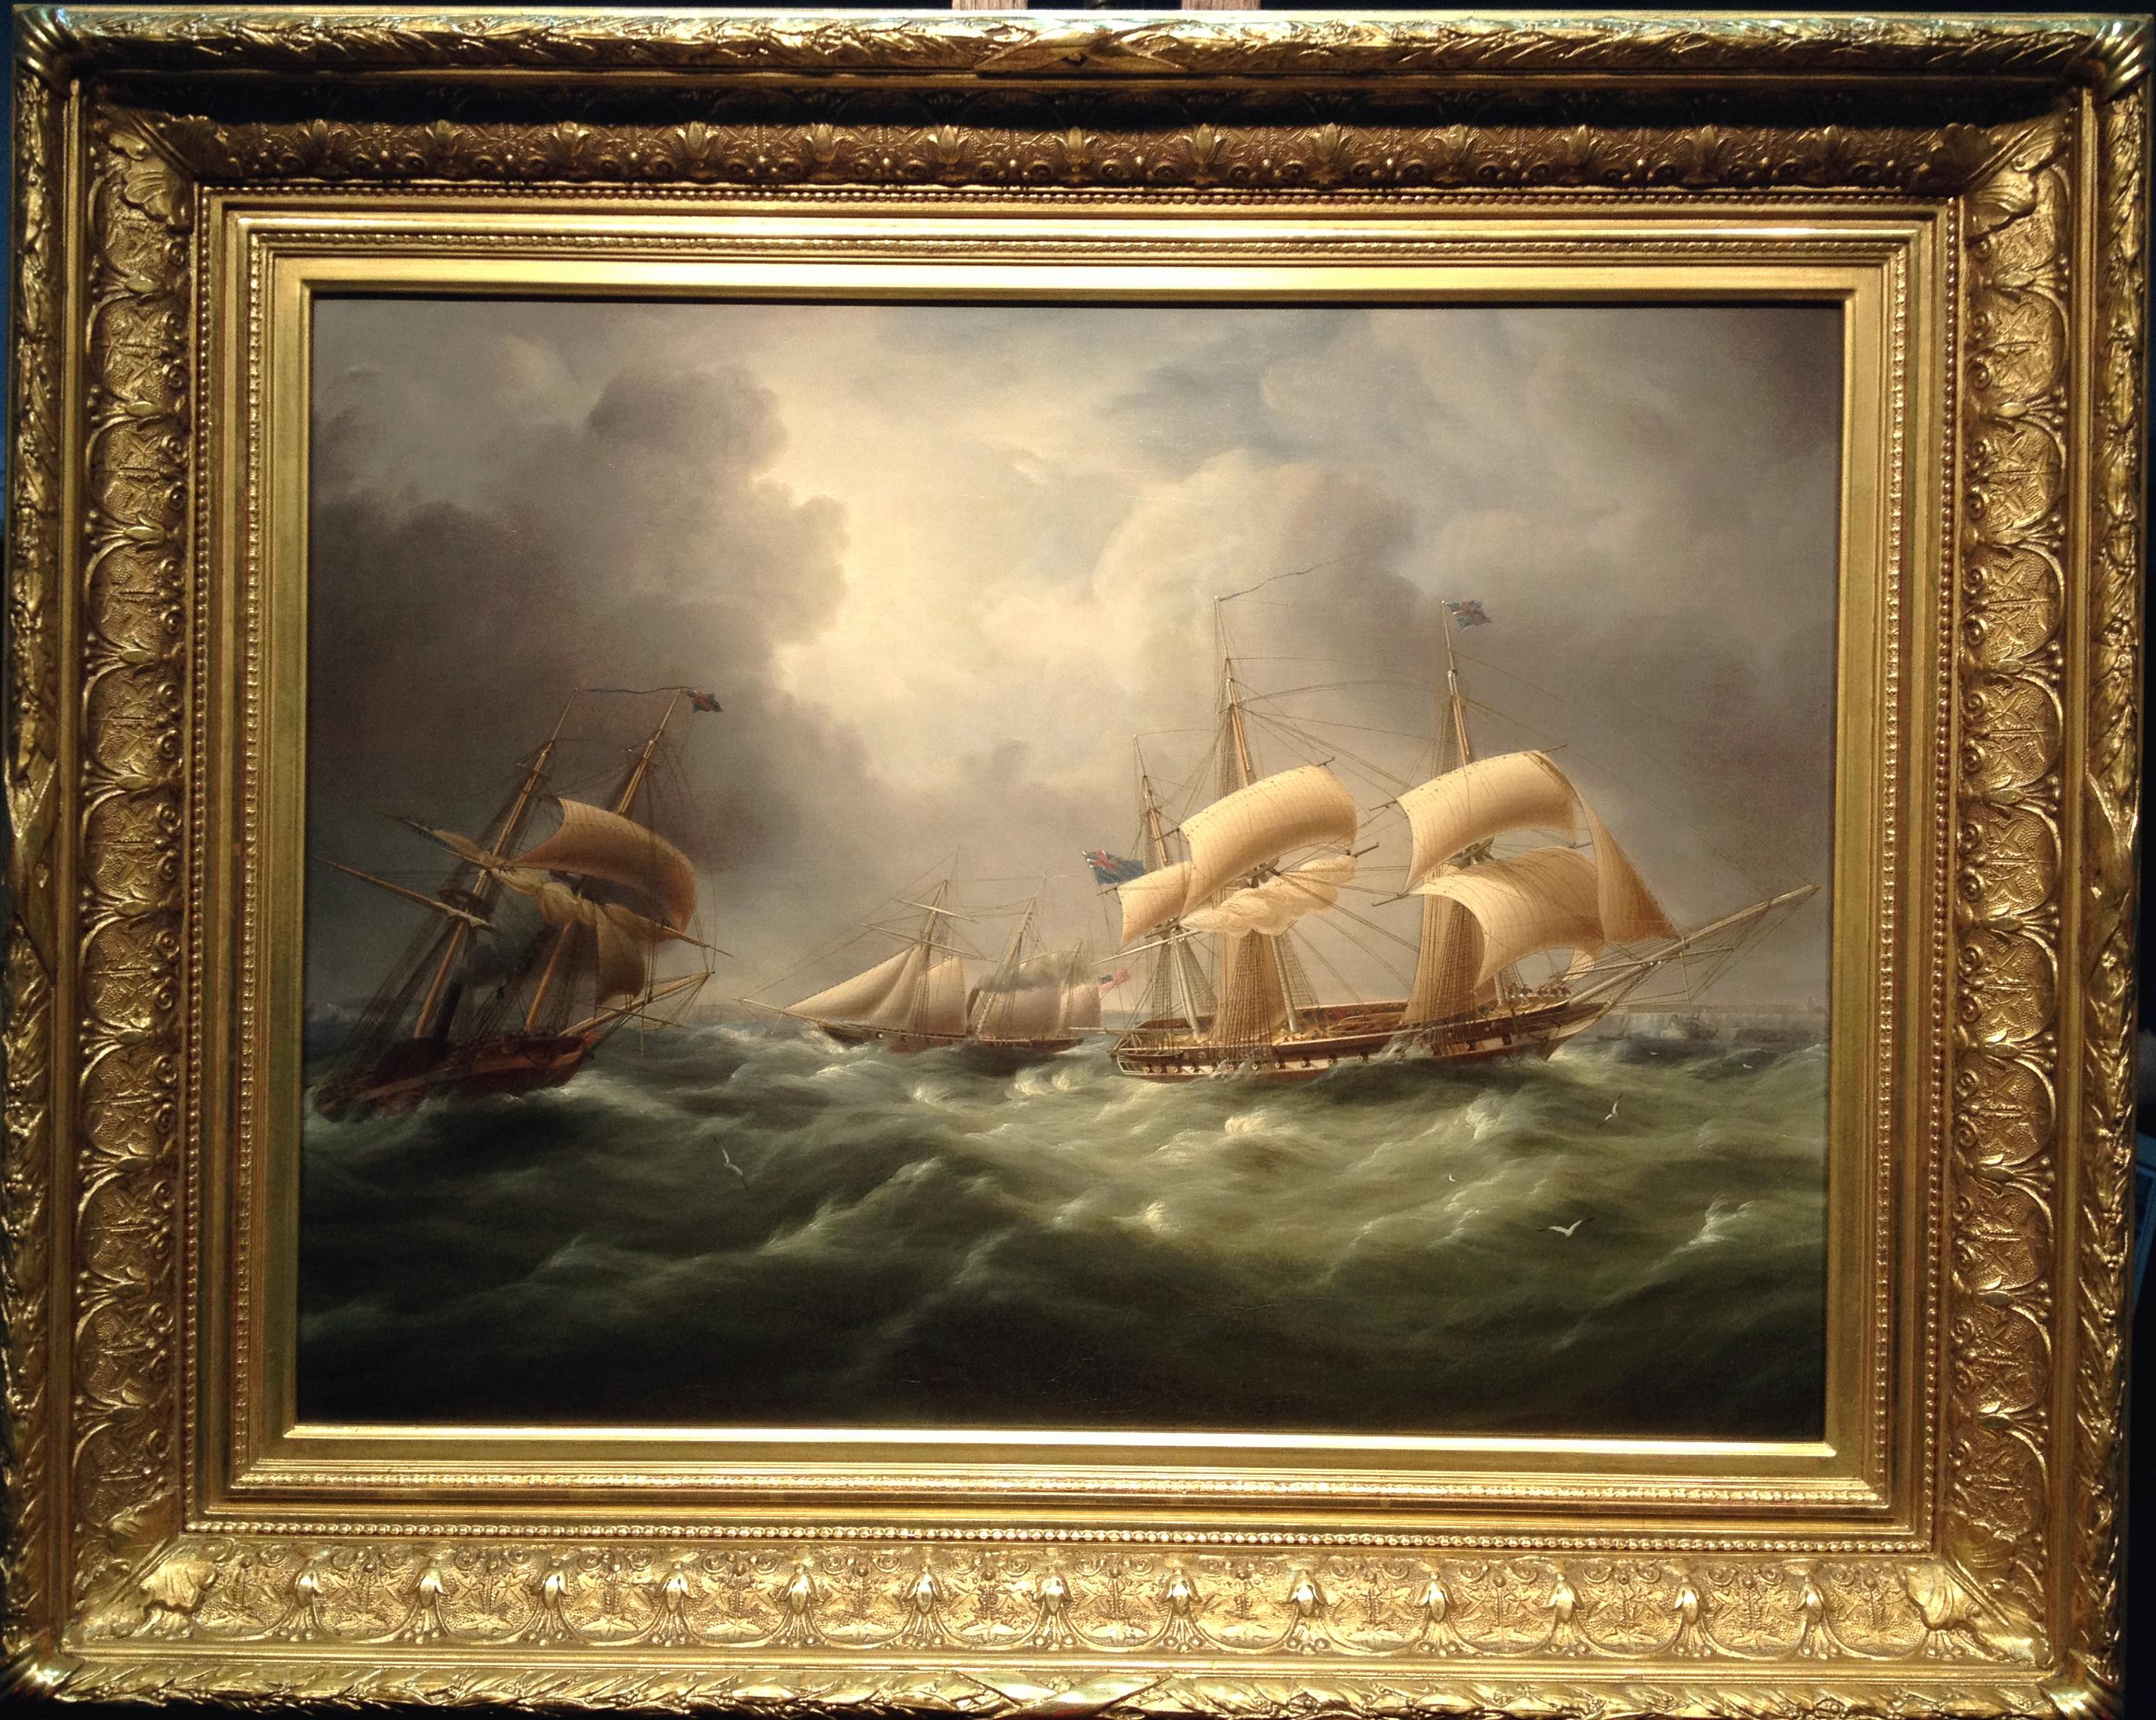 American Steam Schooner Meets British Frigates Crossing the English Channel - Painting by James Edward Buttersworth